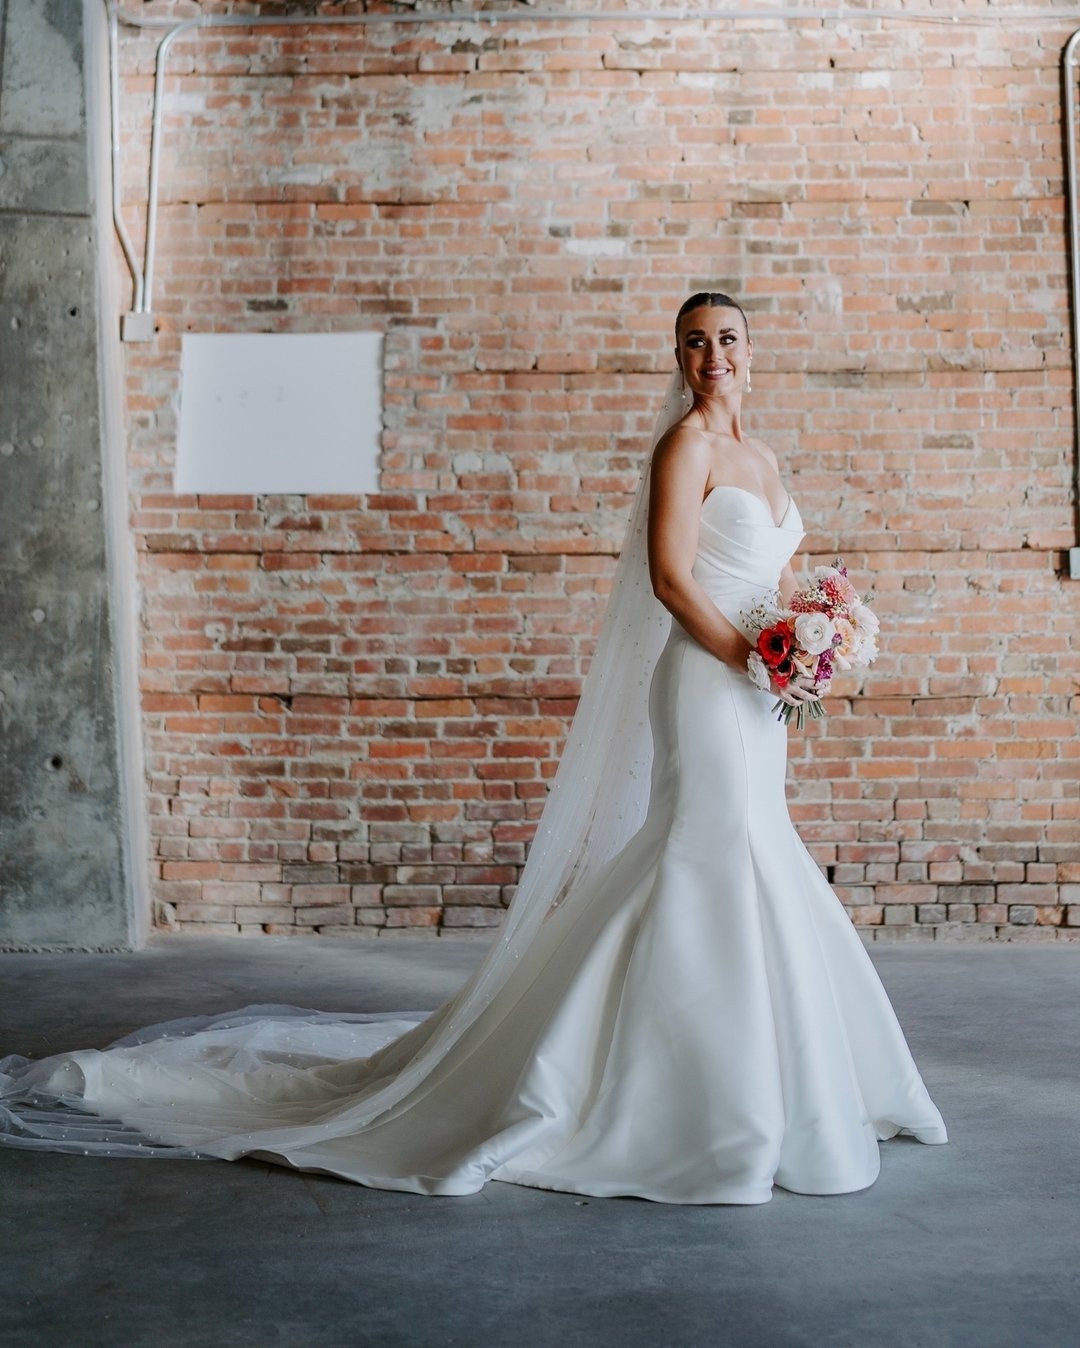 We're obsessed with the incredible natural lighting our venue has to offer&ndash; it sets the stage for the most Instagram-worthy bridal shots! 👰&zwj;♀️ 💐
Is anyone else drooling over this dress?

Bride @kelsey.allin
Photography @nathanwalker.photo